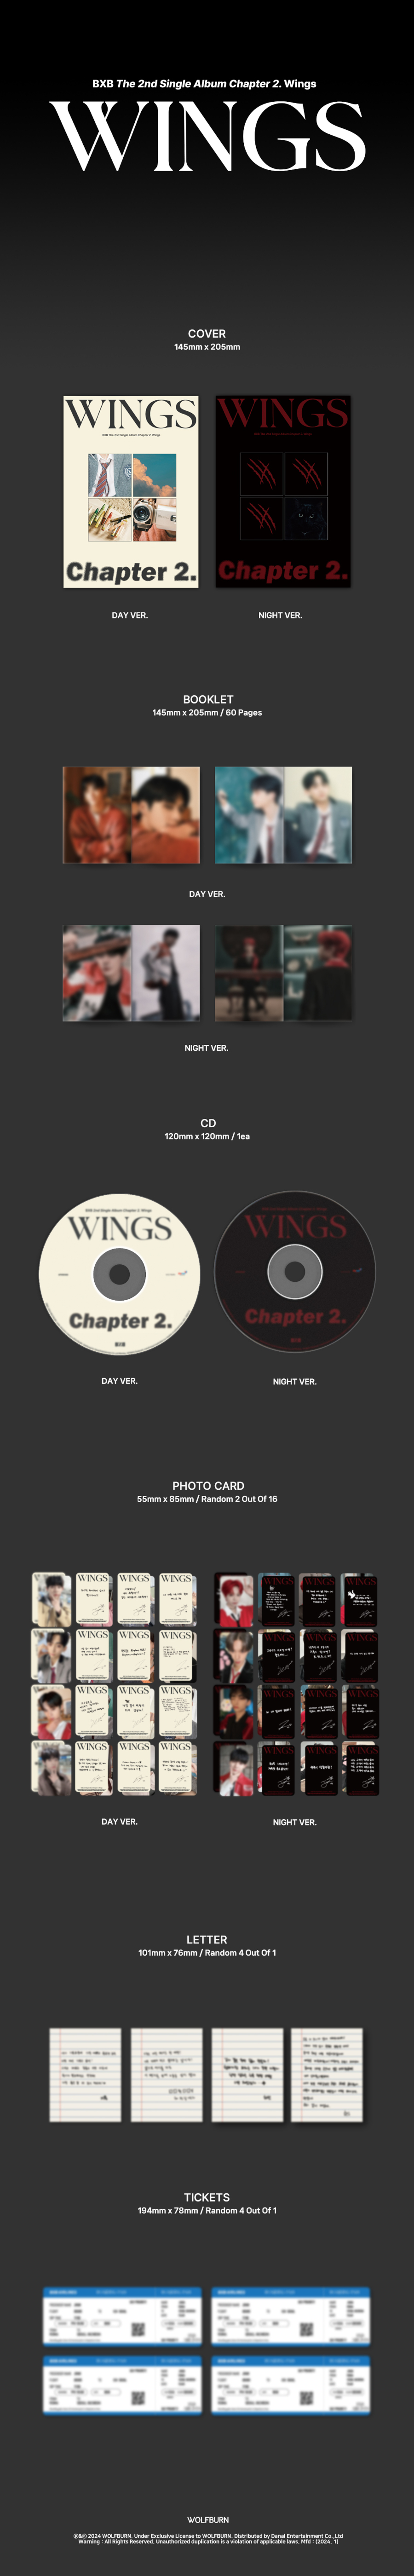 BXB - Chapter 2. Wings []